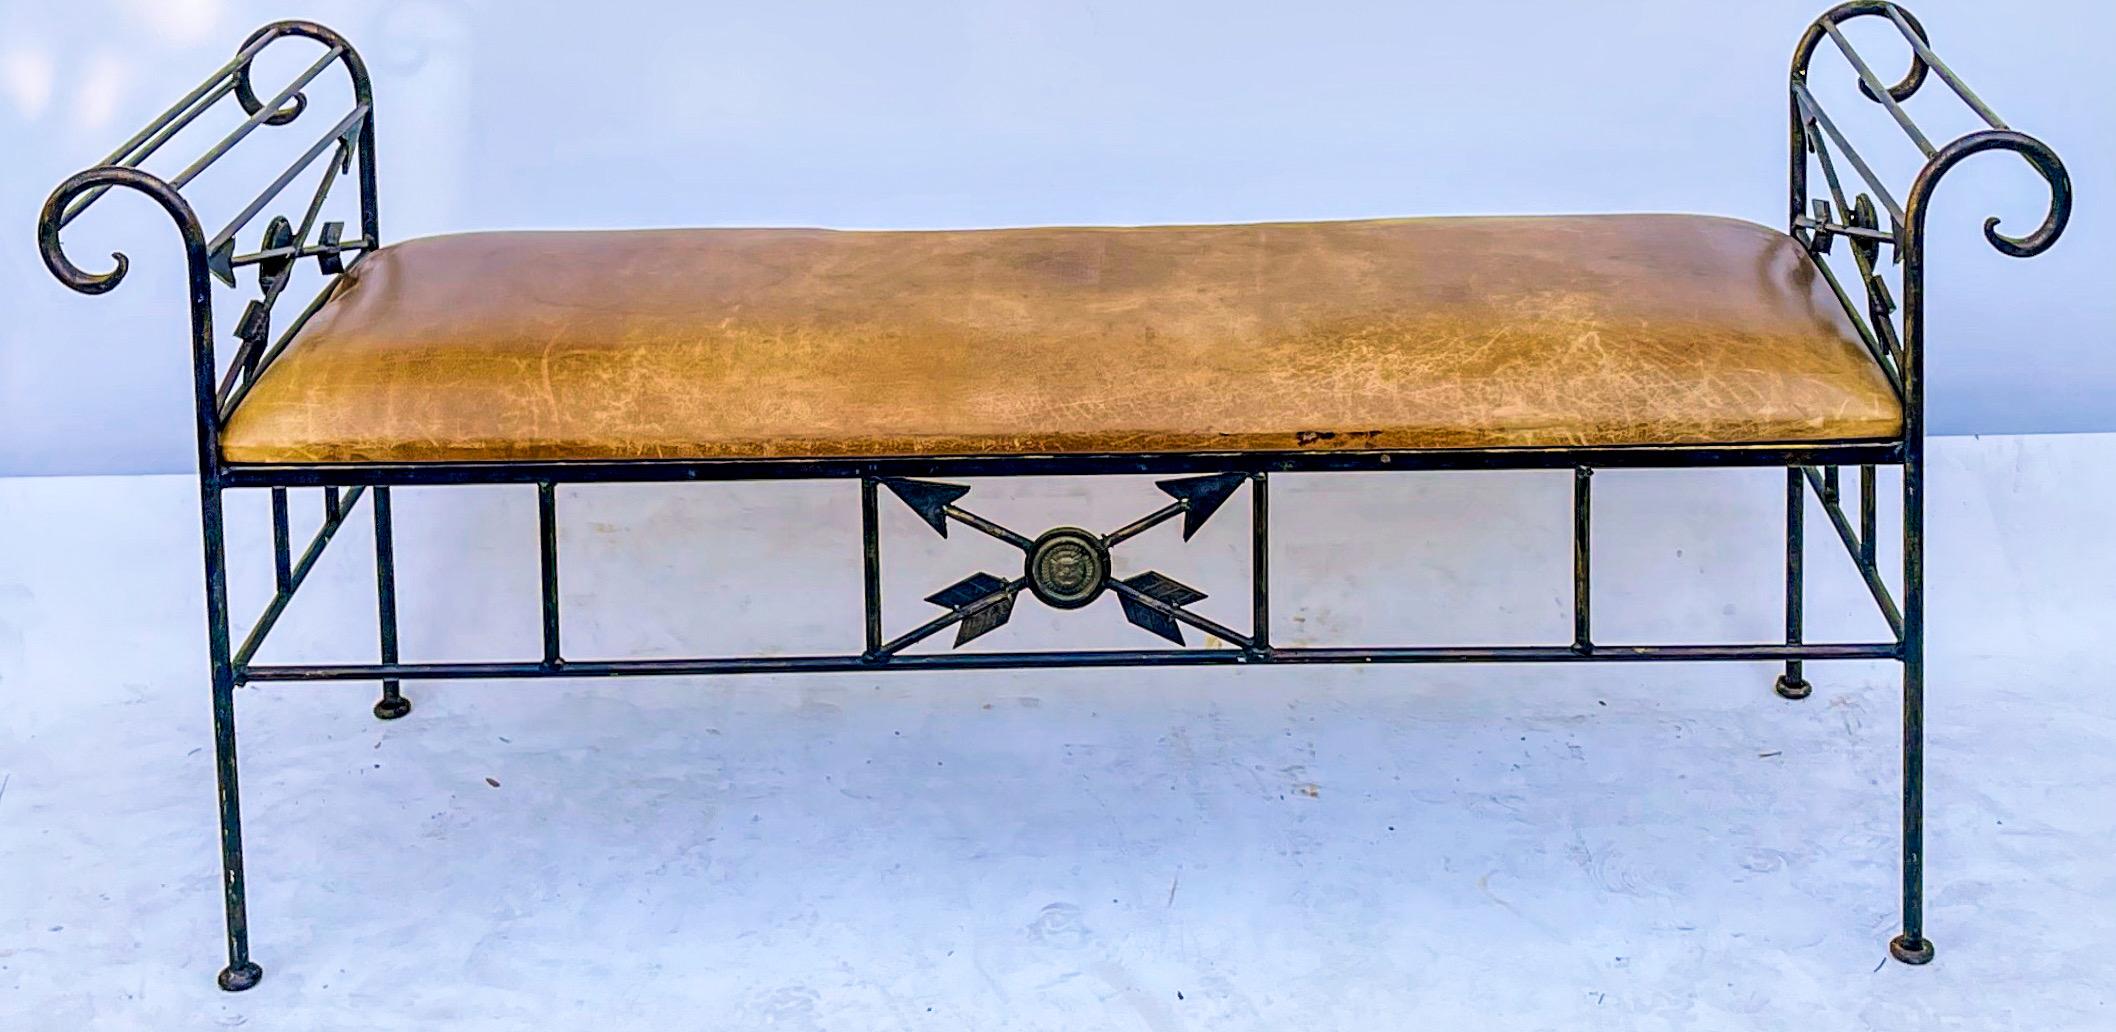 This is a mid-century large scale neo-classical style Italian iron and leather bench. It has a distressed saddle colored leather, and the iron frame is in very good condition. It is unmarked.